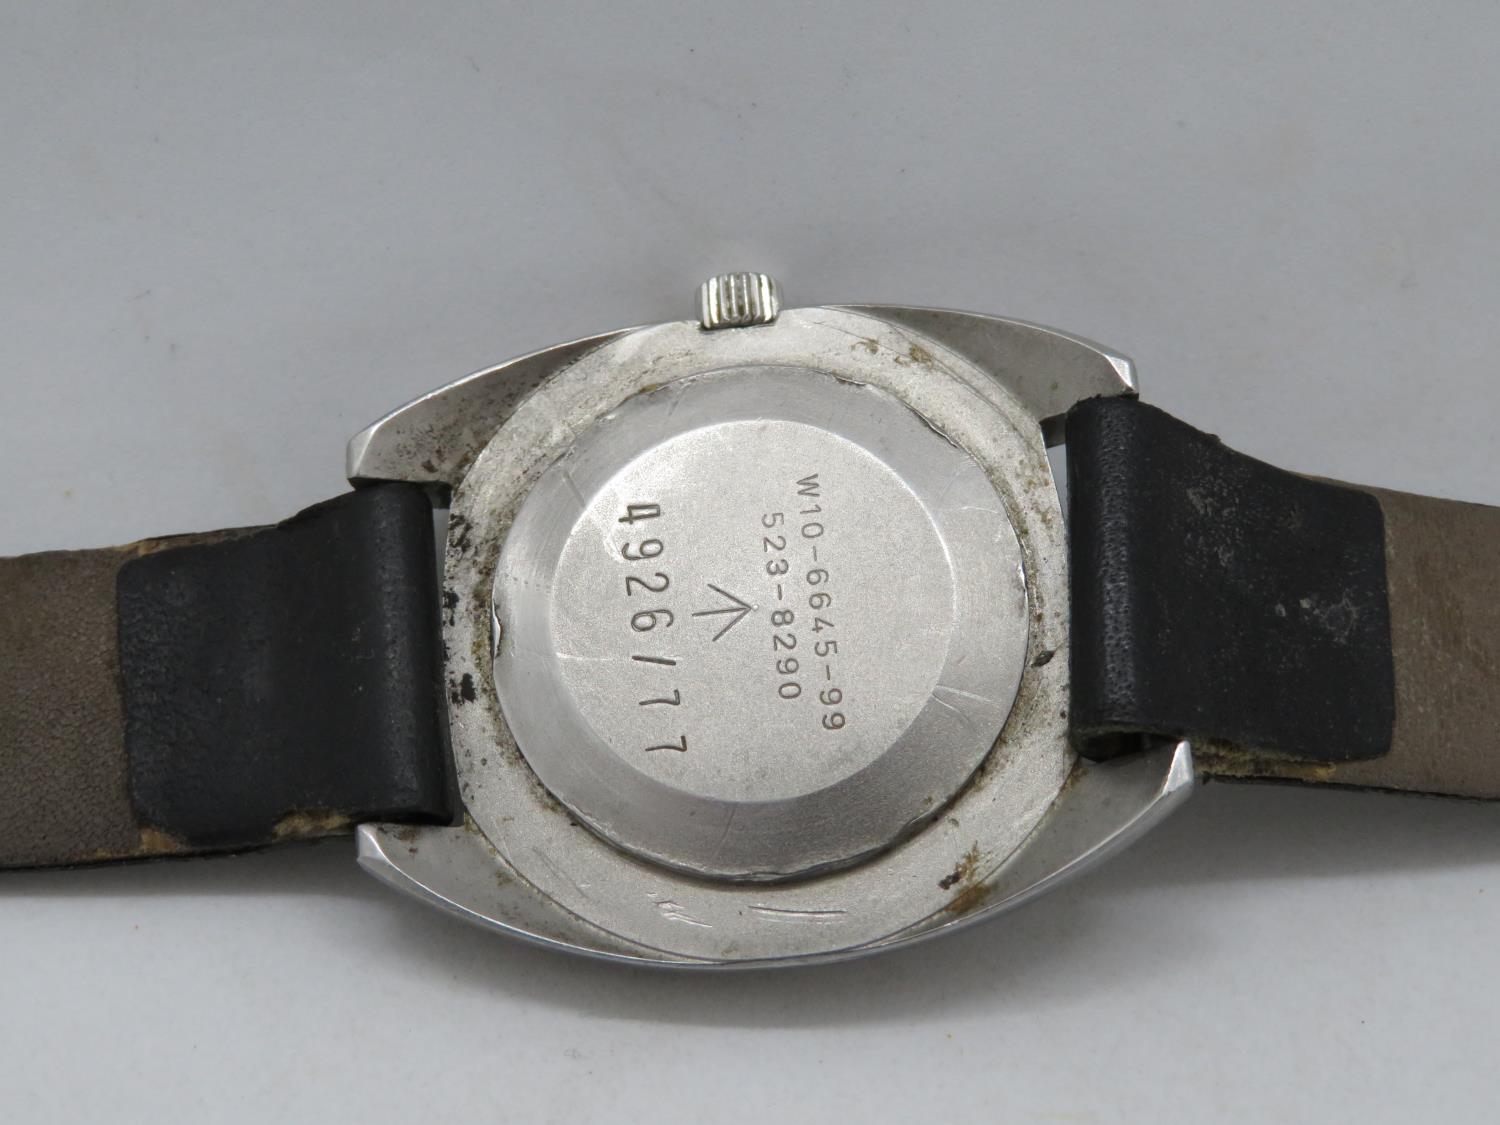 CWC Military watch - Image 2 of 2